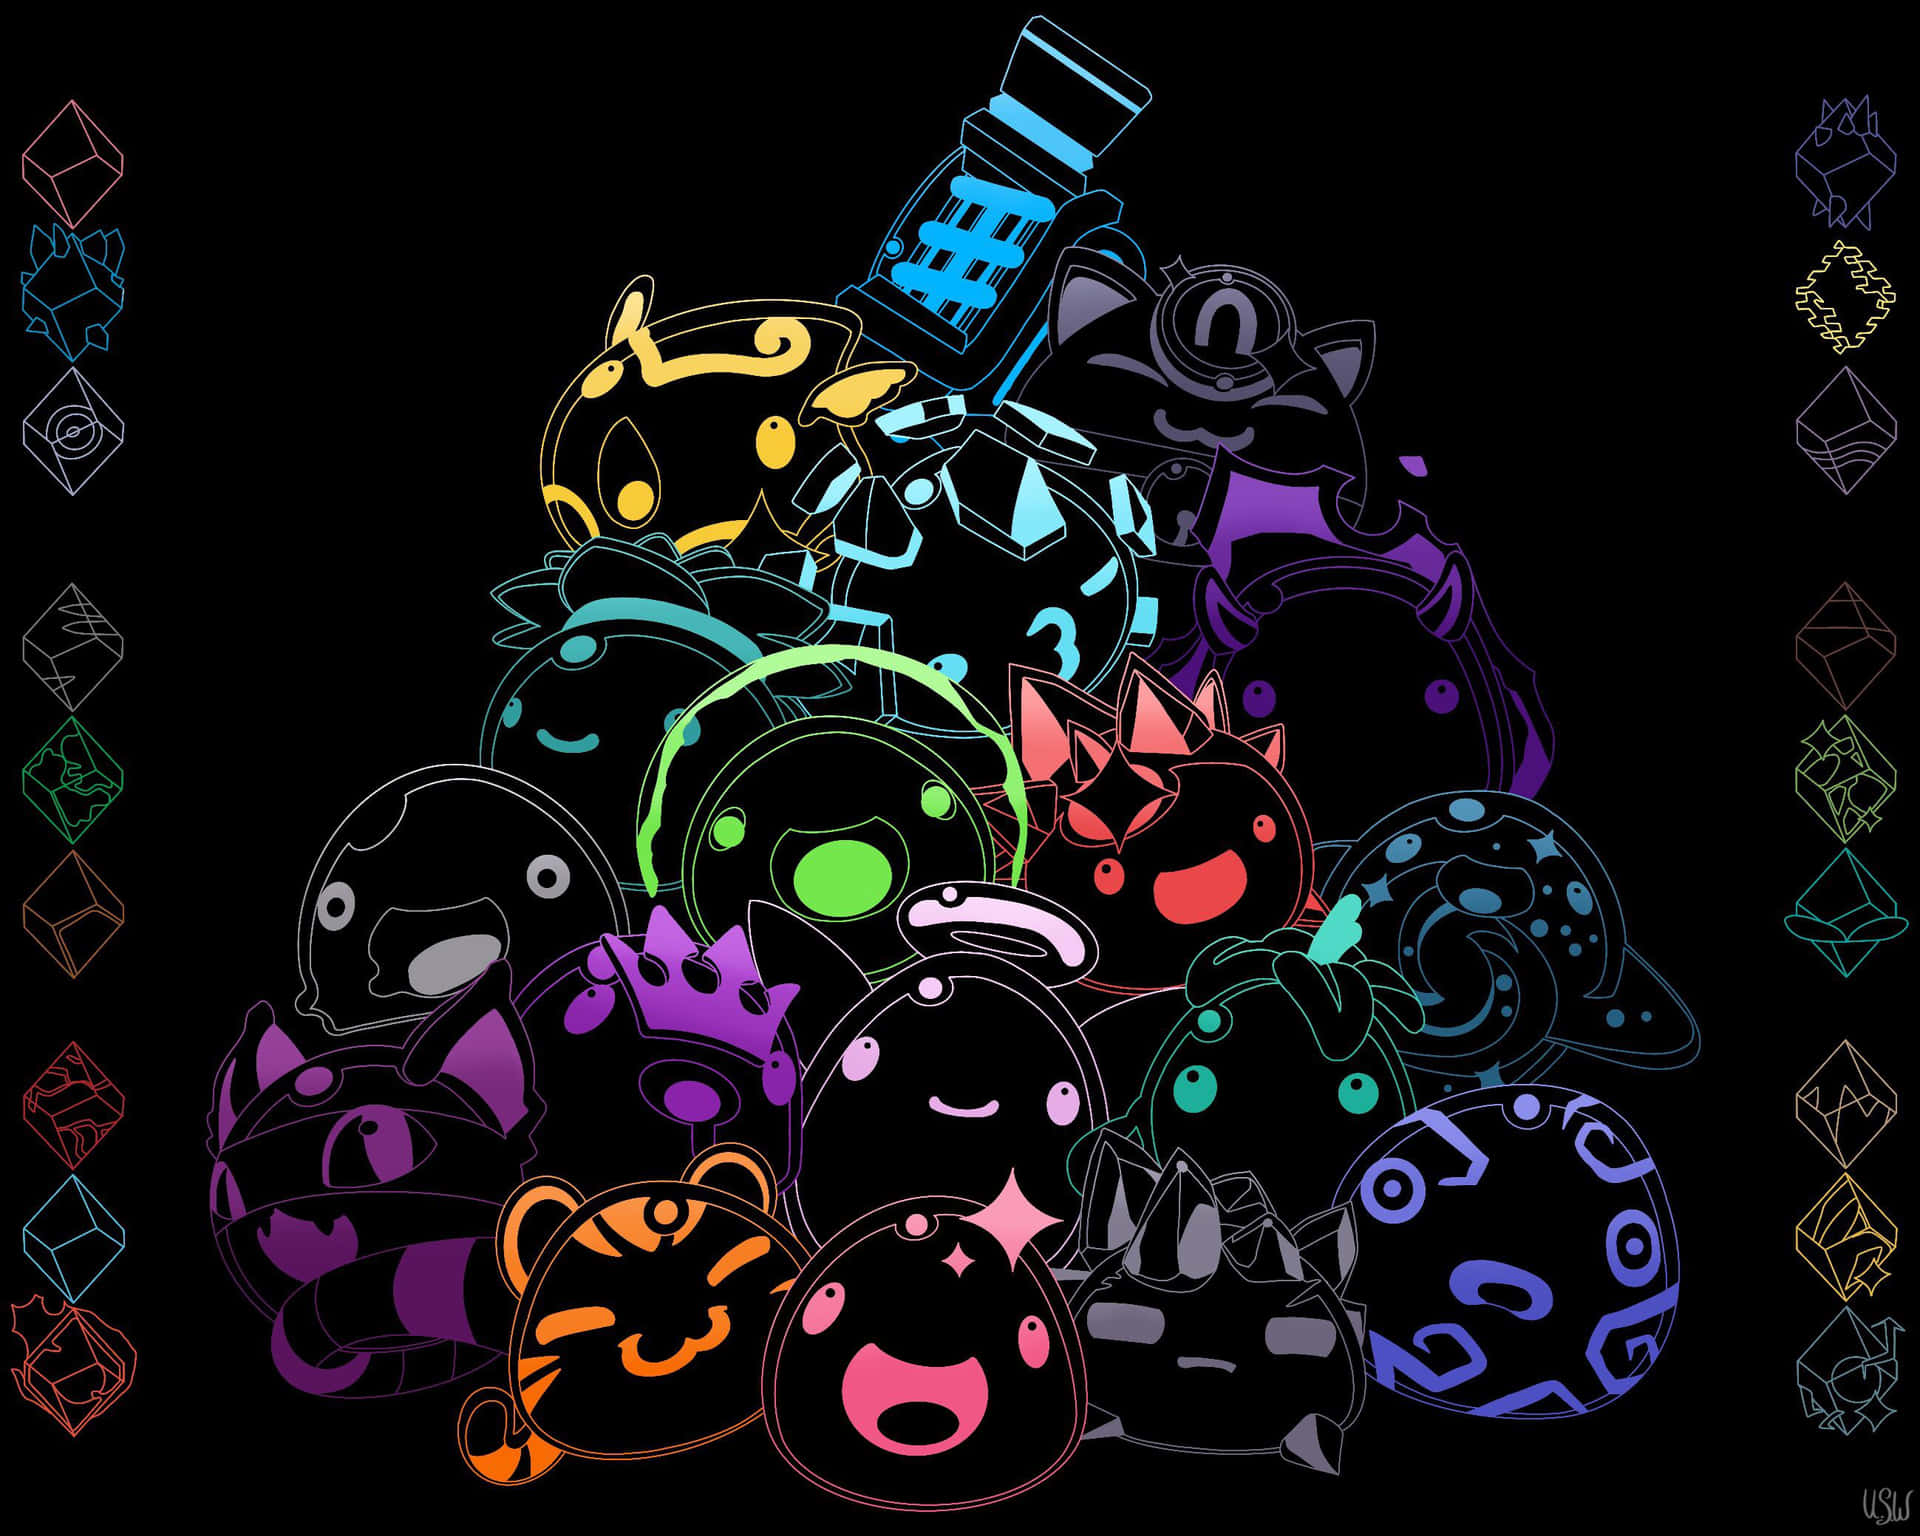 A Pile Of Colorful Characters In A Dark Room Background